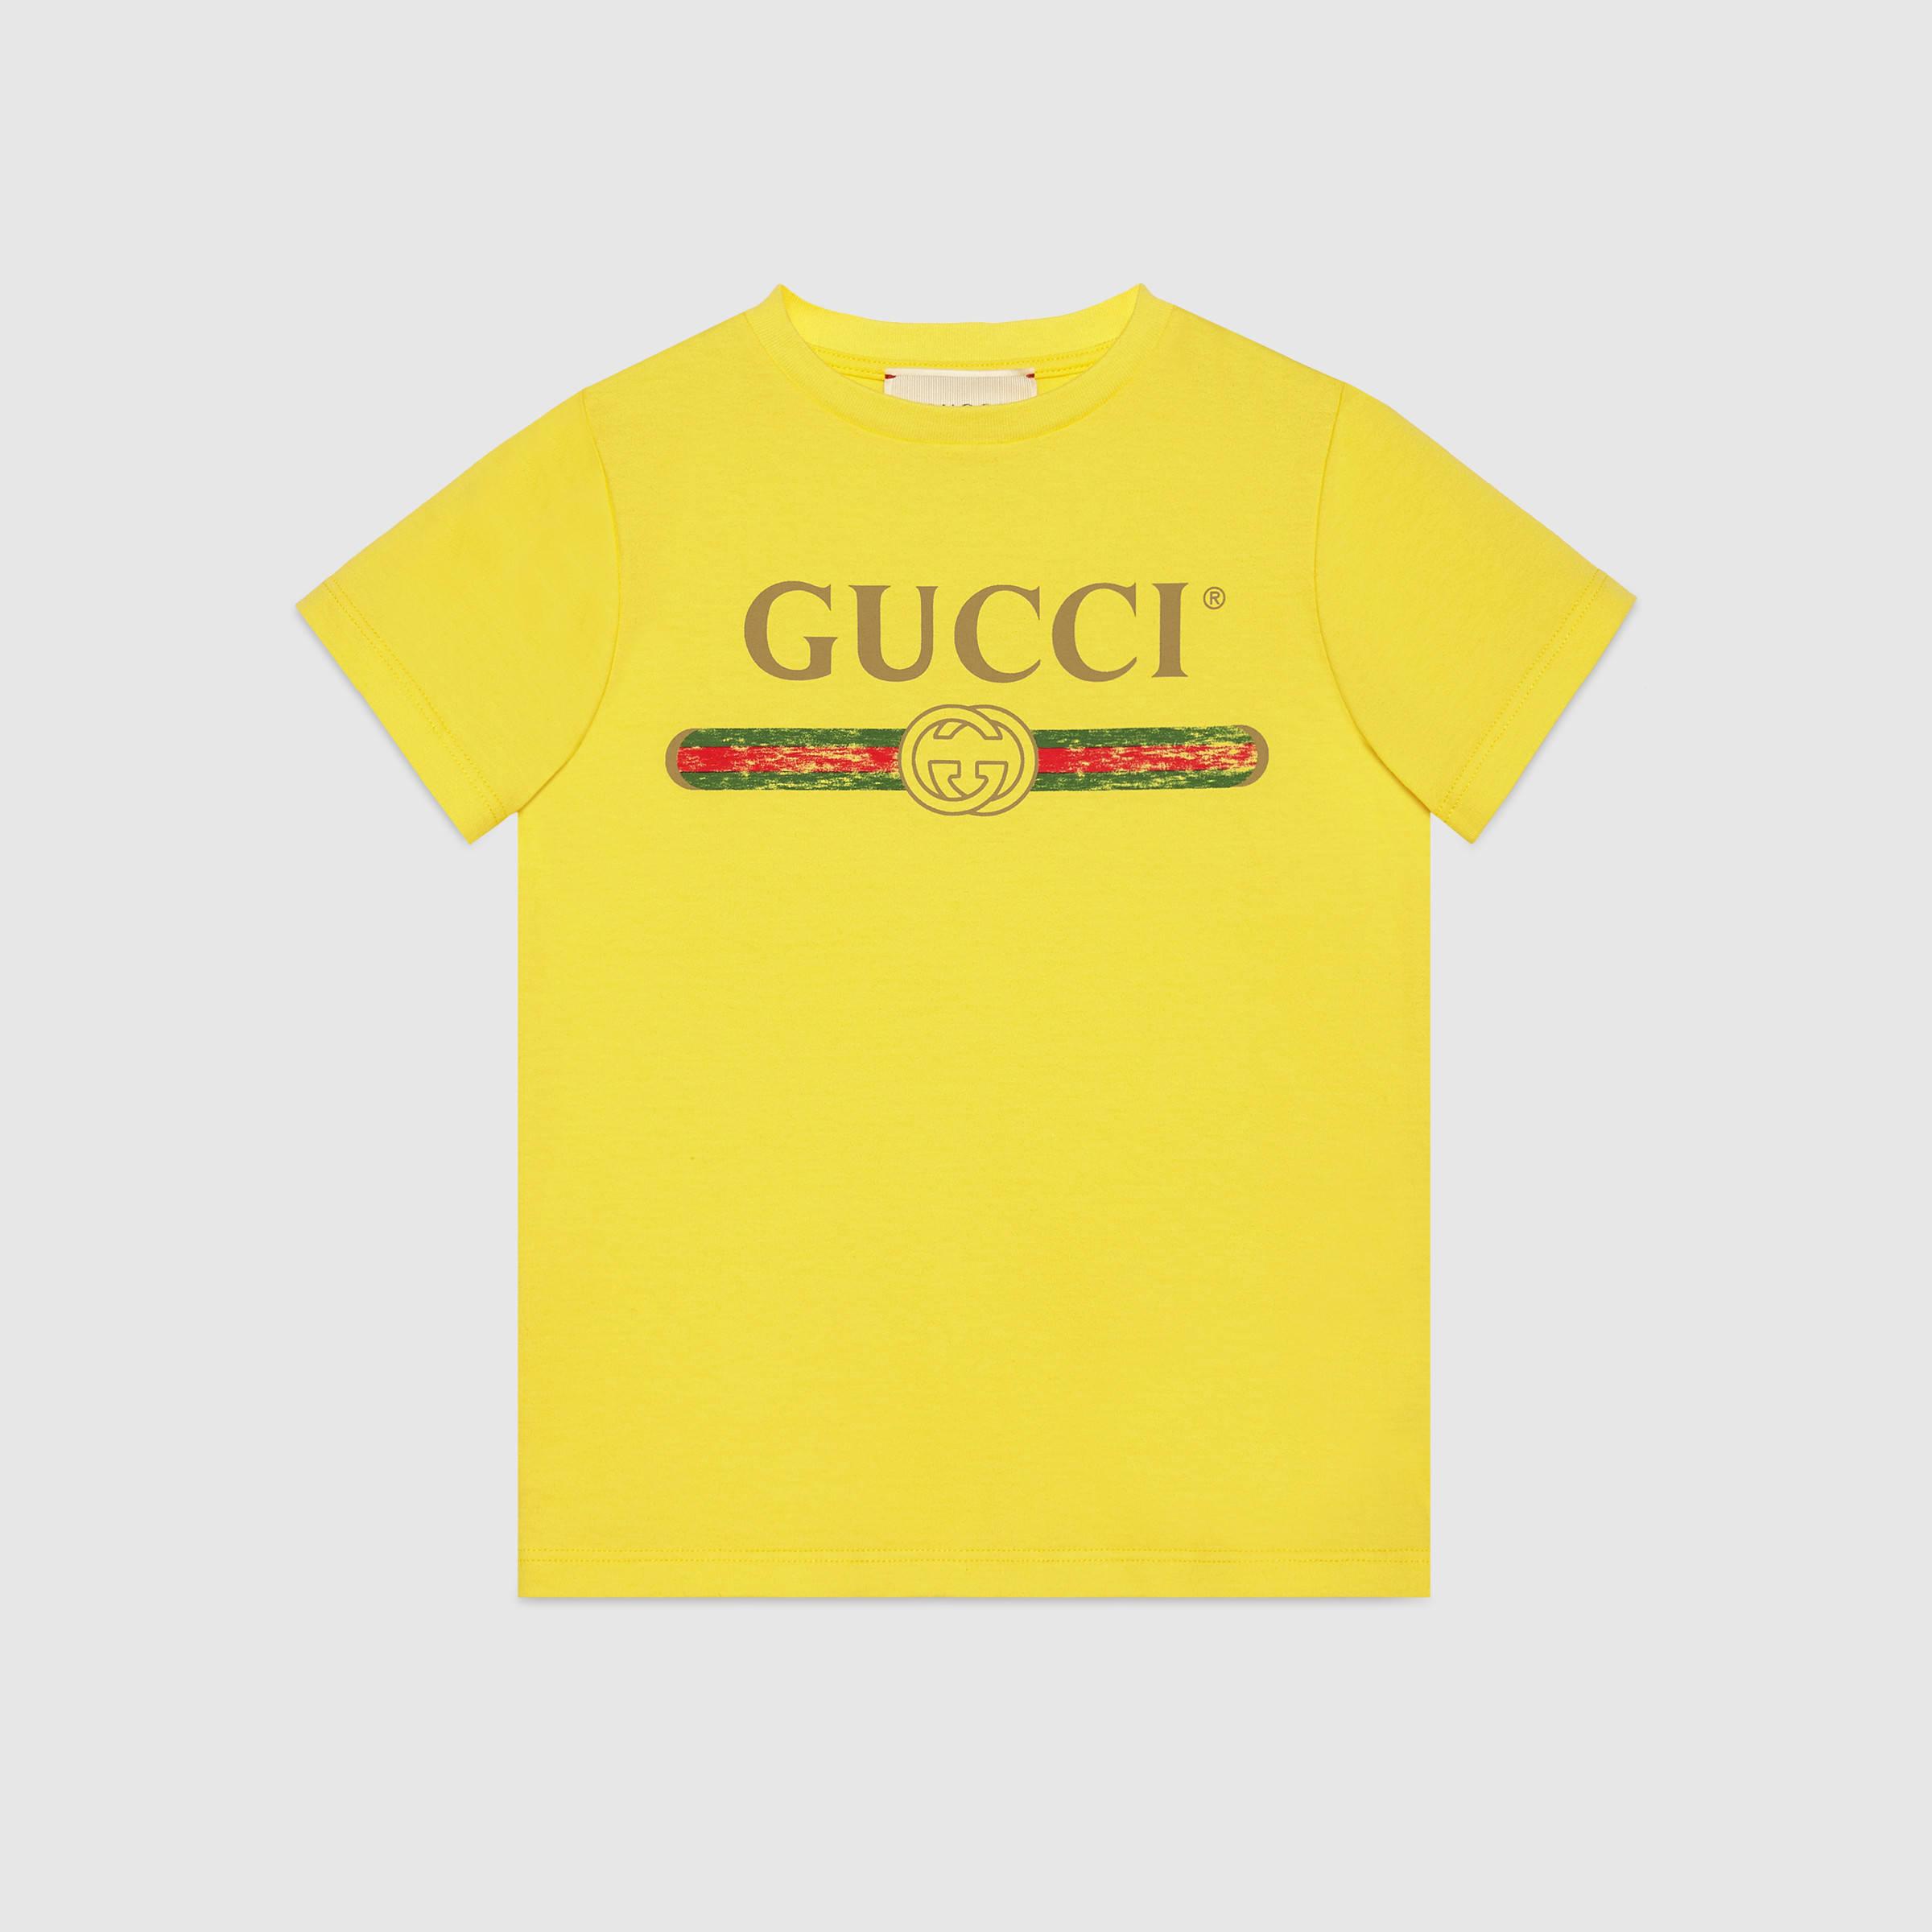 Real Gucci Logo - Discount Real Gucci Childrens Cotton T Shirt With Gucci Logo